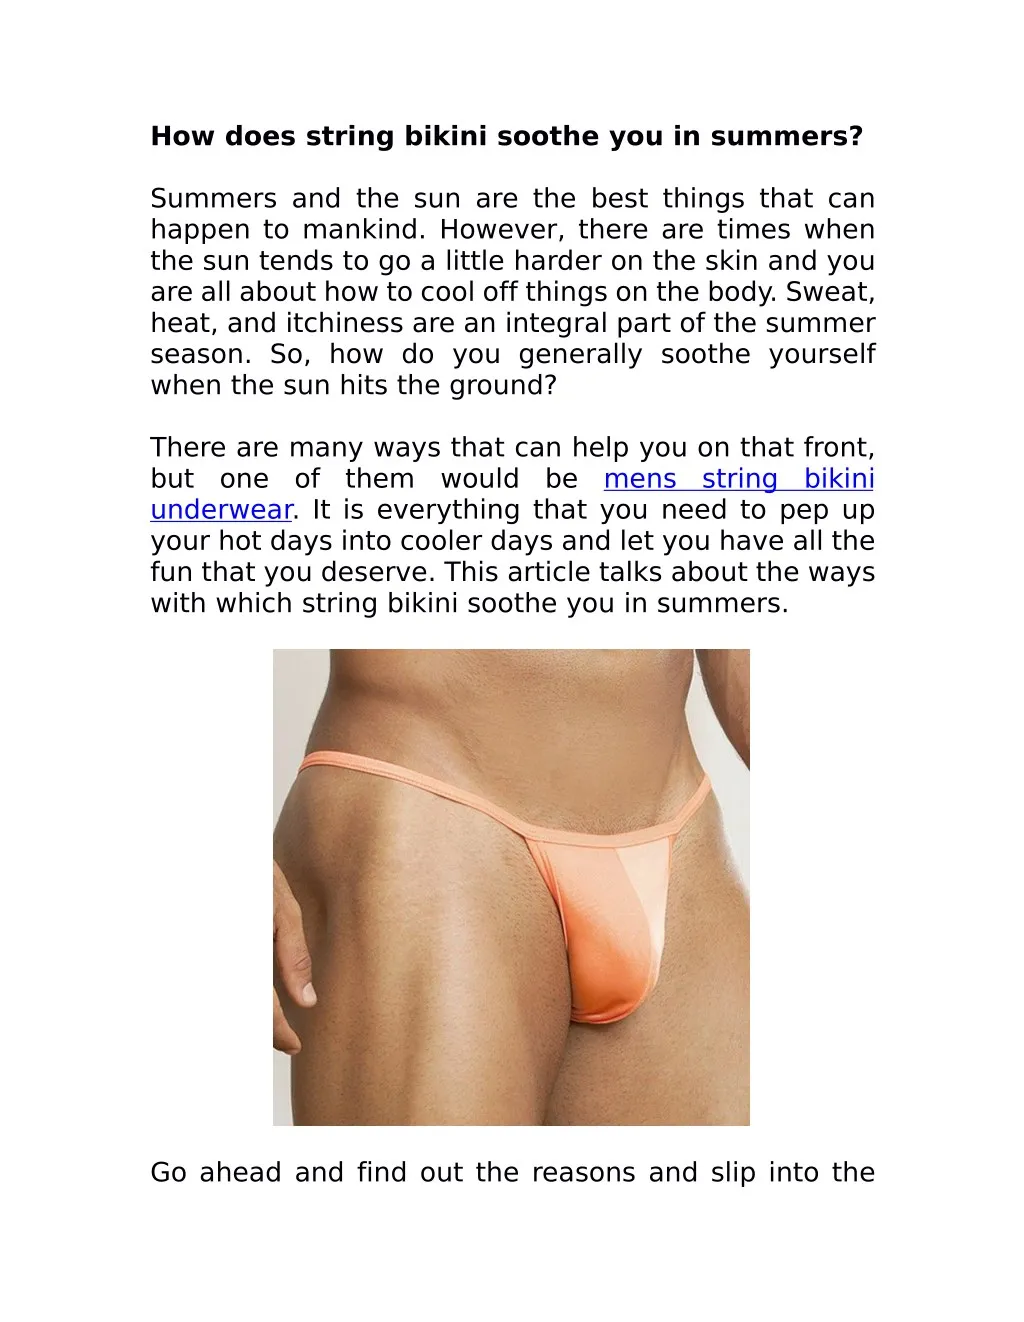 how does string bikini soothe you in summers